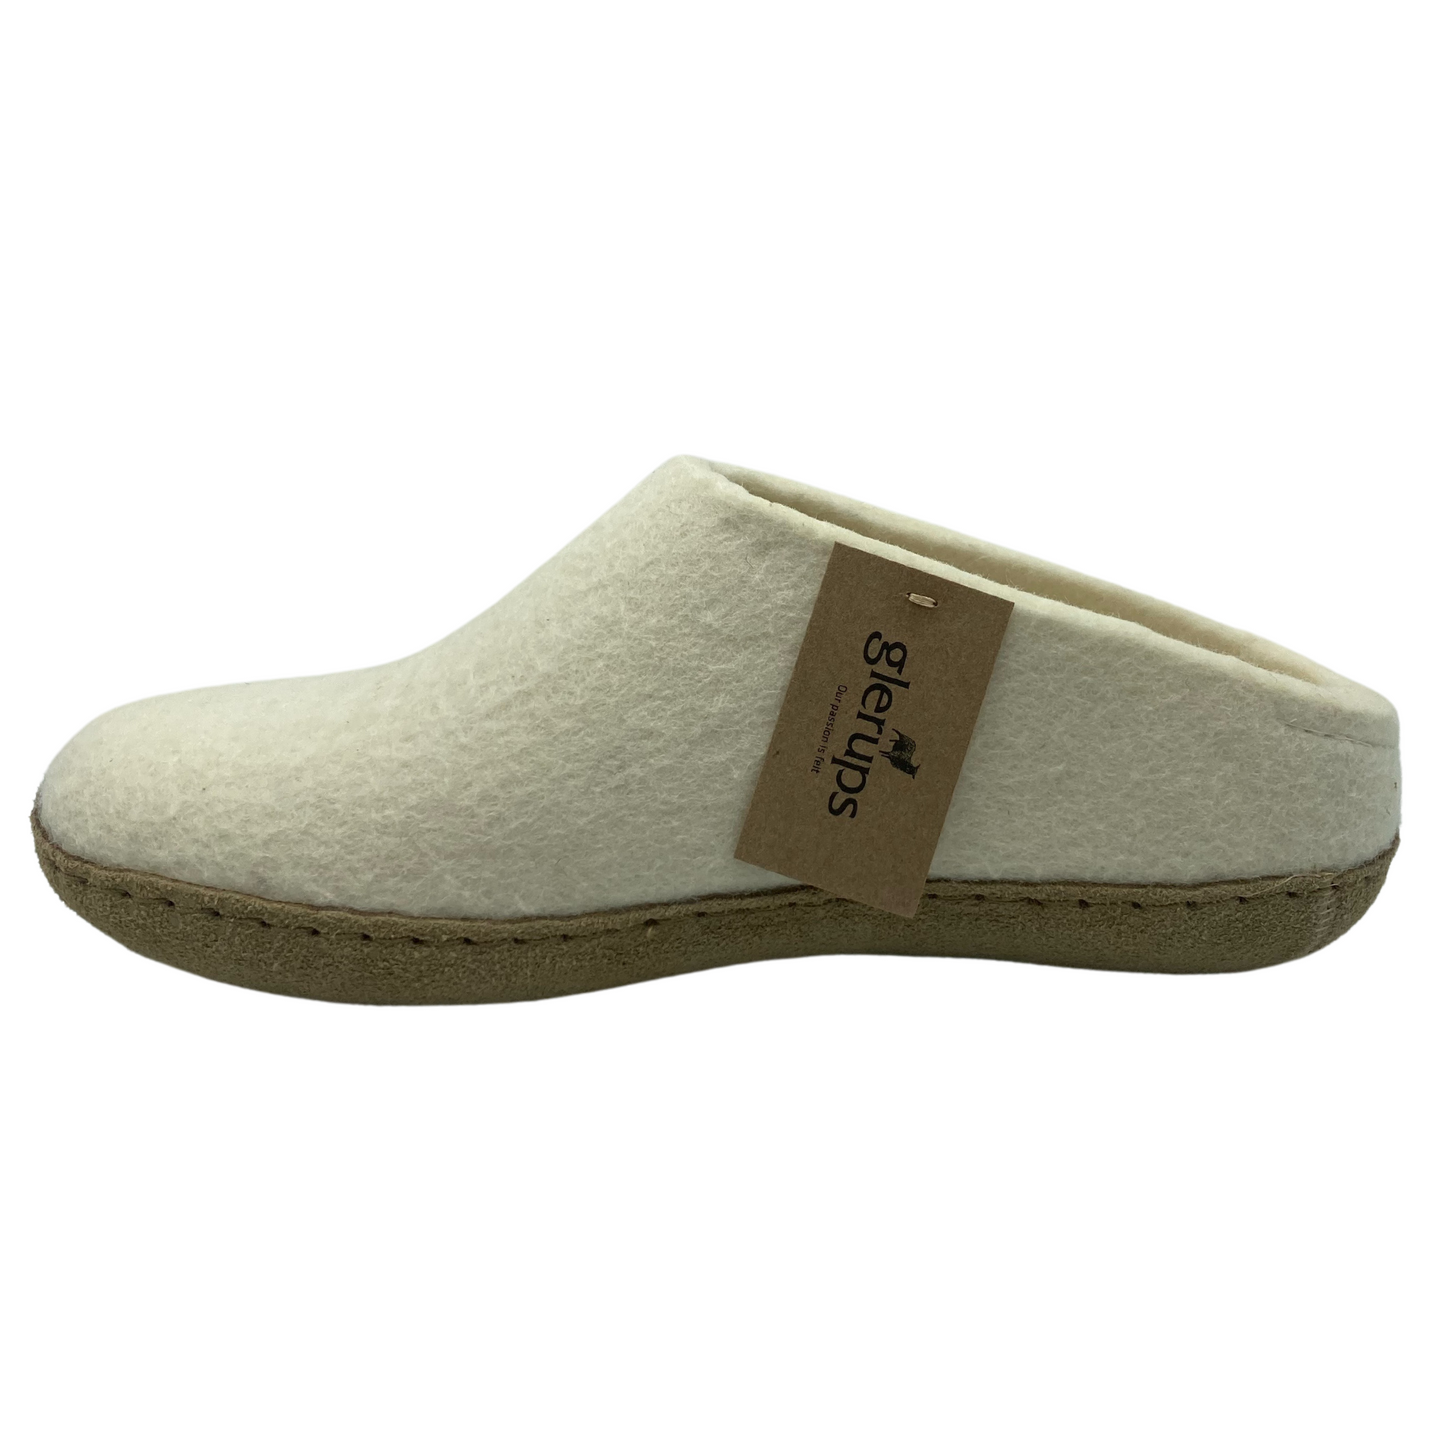 Left facing view of white felted wool slip-on shoe with brown leather outsole